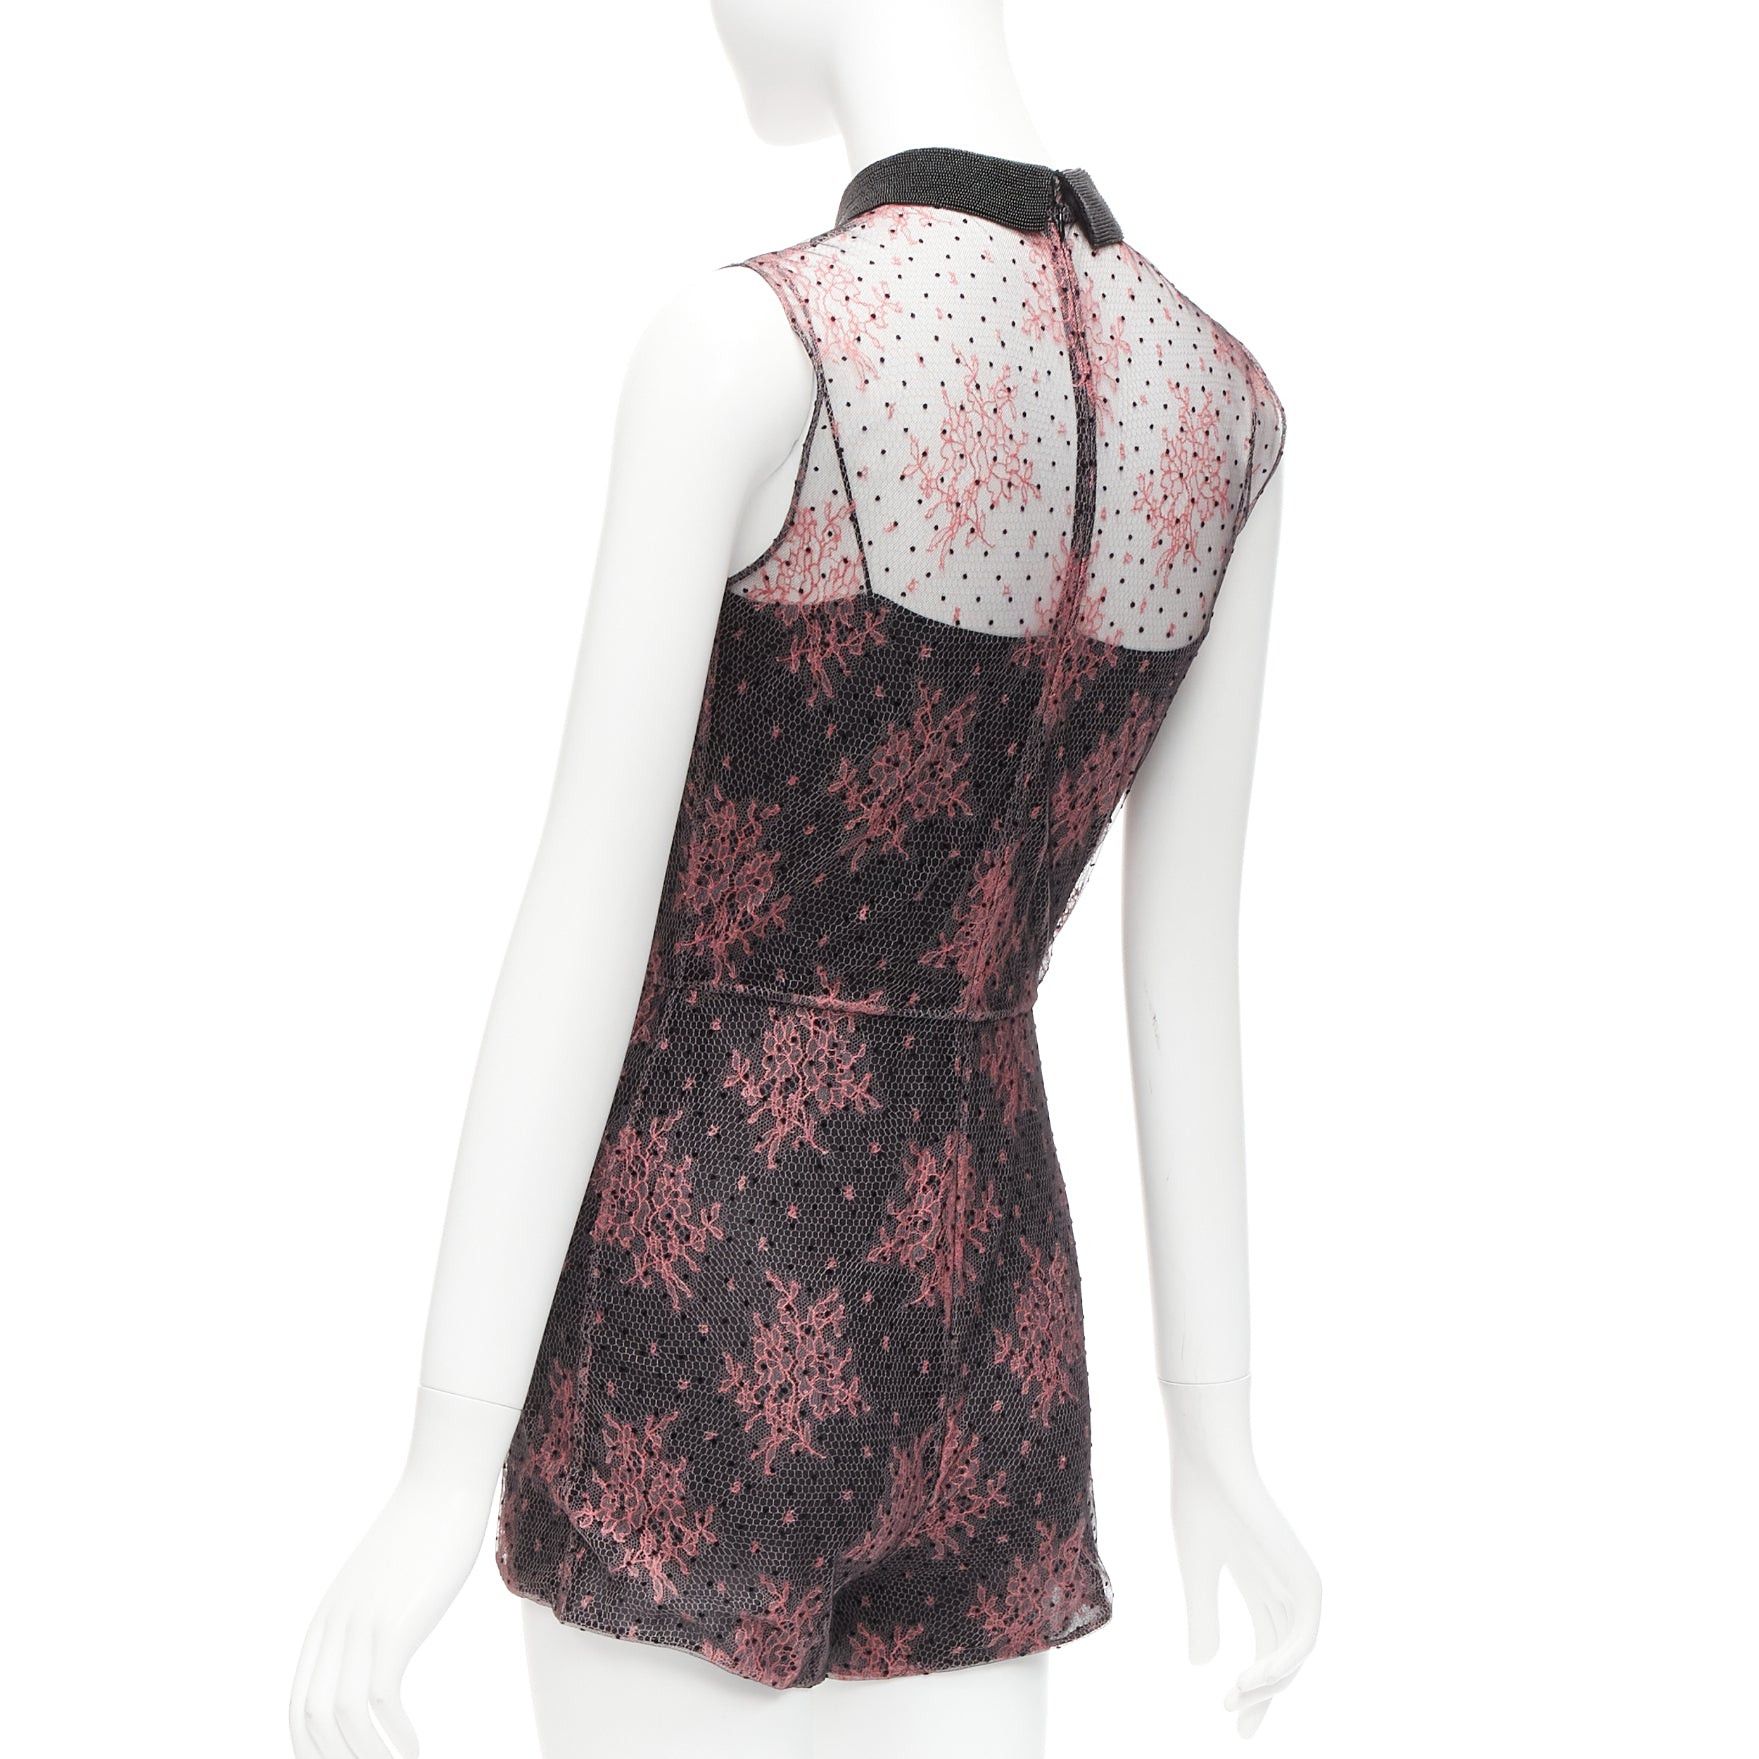 Dior CHRISTIAN DIOR black pink intricate lace overlay playsuit romper FR34 XS Size 26" / US 2 / IT 38 - 6 Thumbnail